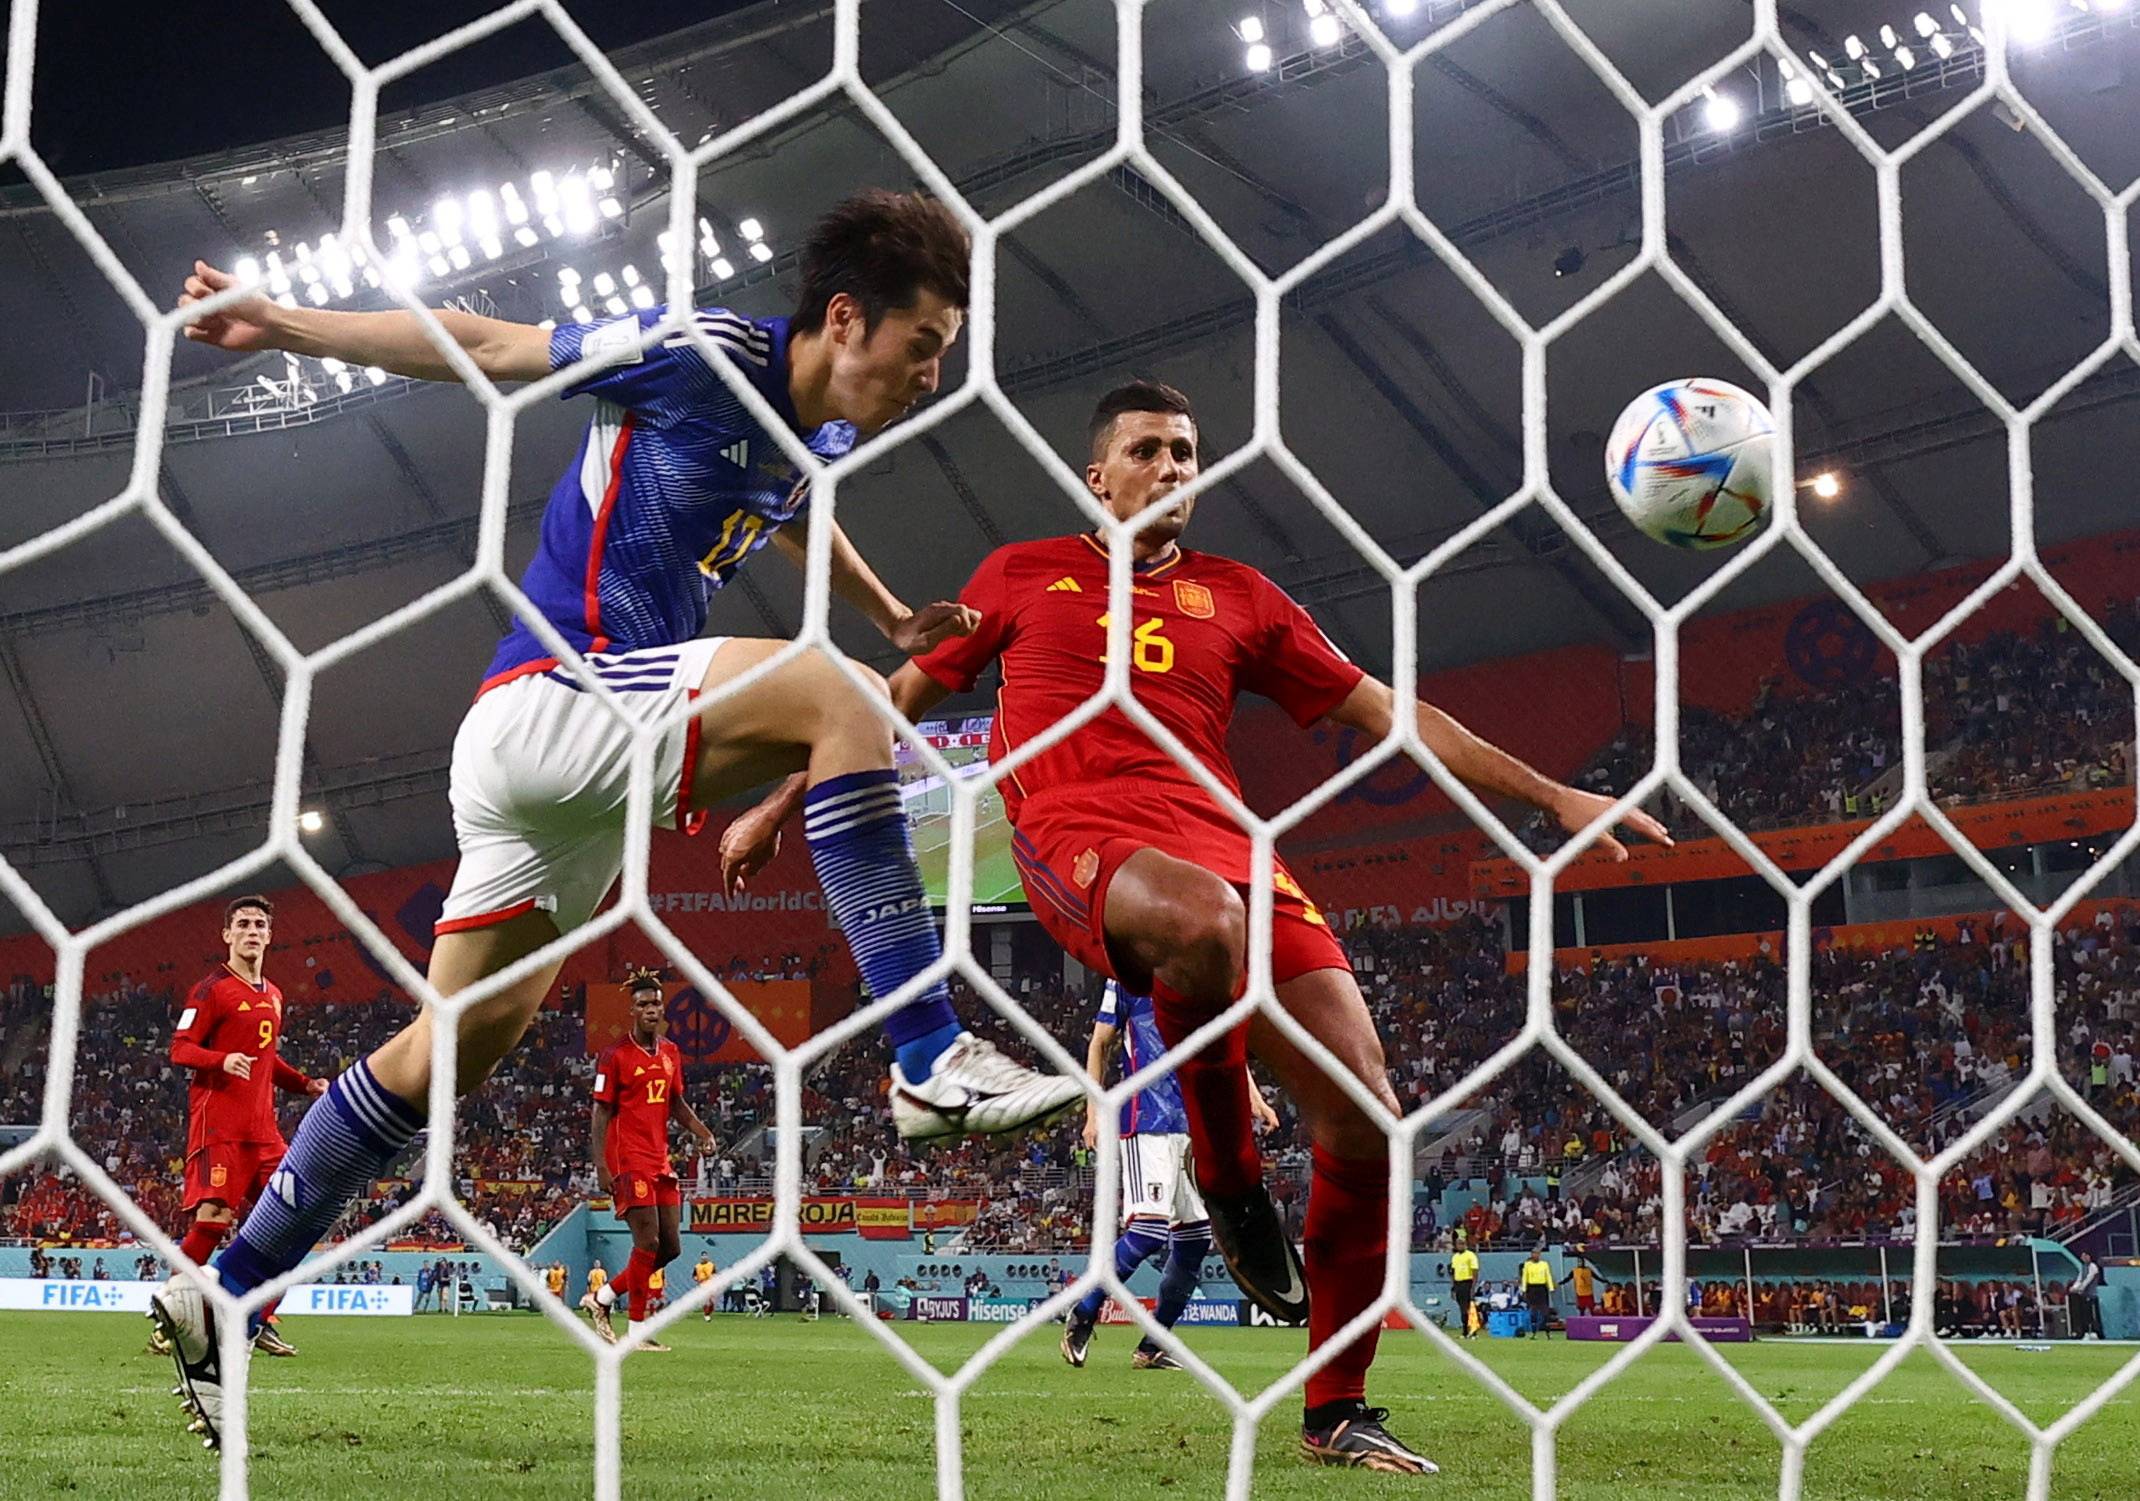 Japan defeats Spain to advance in shock World Cup upset